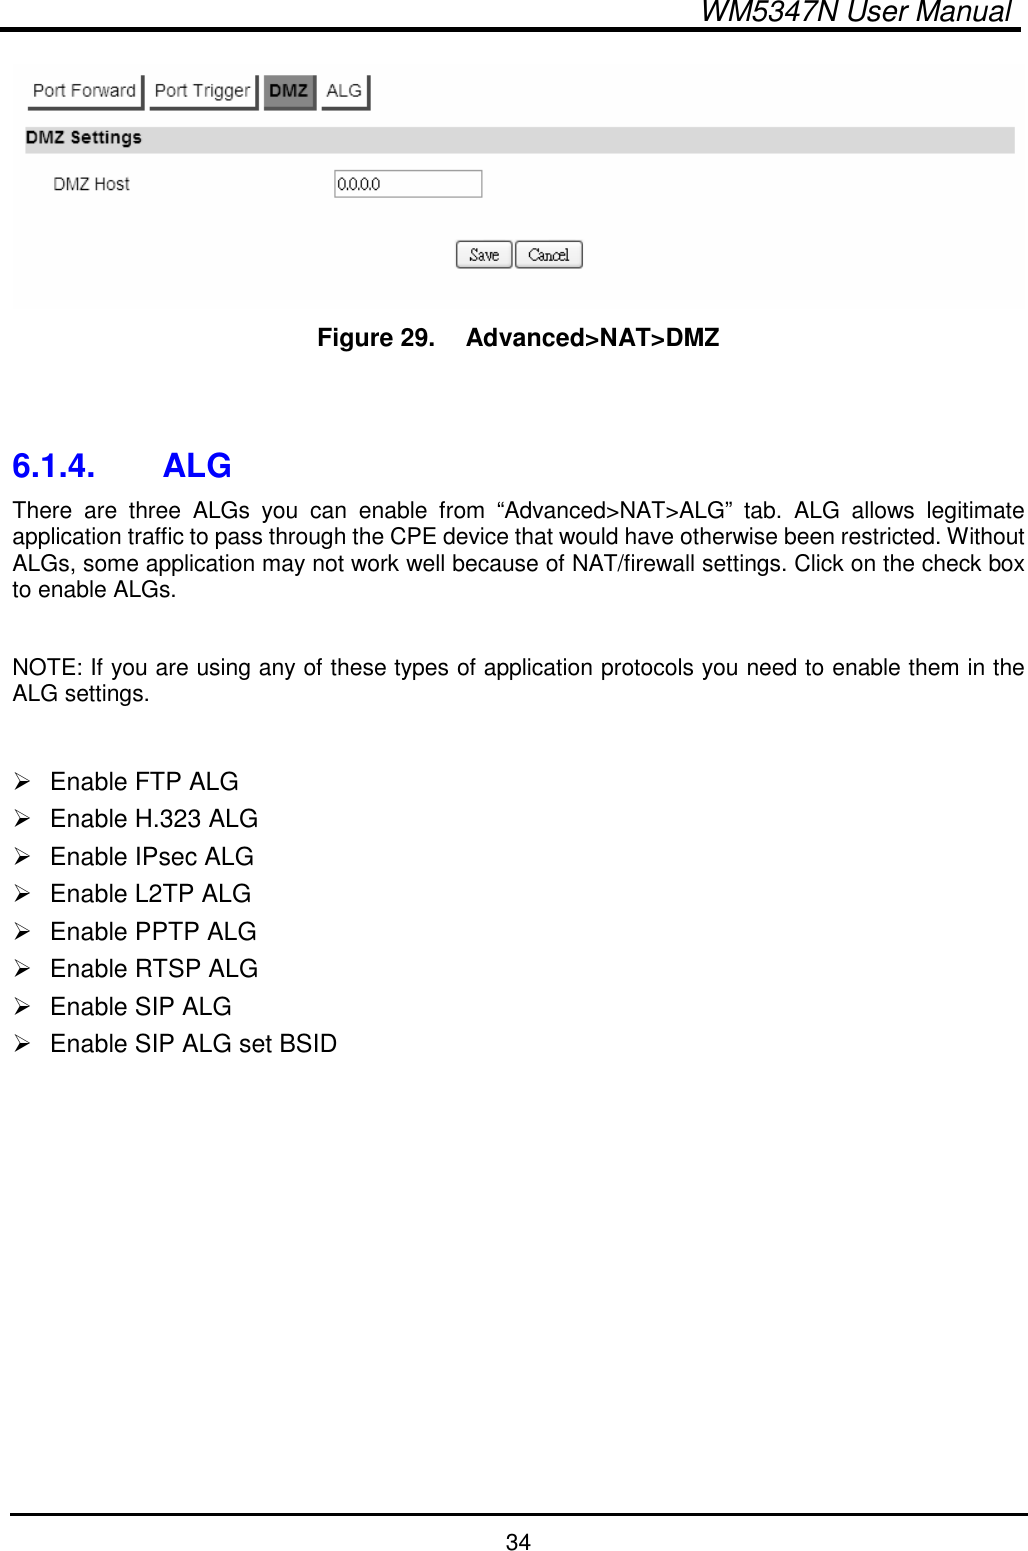  WM5347N User Manual  34  Figure 29.   Advanced&gt;NAT&gt;DMZ   6.1.4.  ALG There  are  three  ALGs  you  can  enable  from  “Advanced&gt;NAT&gt;ALG”  tab.  ALG  allows  legitimate application traffic to pass through the CPE device that would have otherwise been restricted. Without ALGs, some application may not work well because of NAT/firewall settings. Click on the check box to enable ALGs.  NOTE: If you are using any of these types of application protocols you need to enable them in the ALG settings.    Enable FTP ALG   Enable H.323 ALG   Enable IPsec ALG   Enable L2TP ALG   Enable PPTP ALG   Enable RTSP ALG   Enable SIP ALG   Enable SIP ALG set BSID  